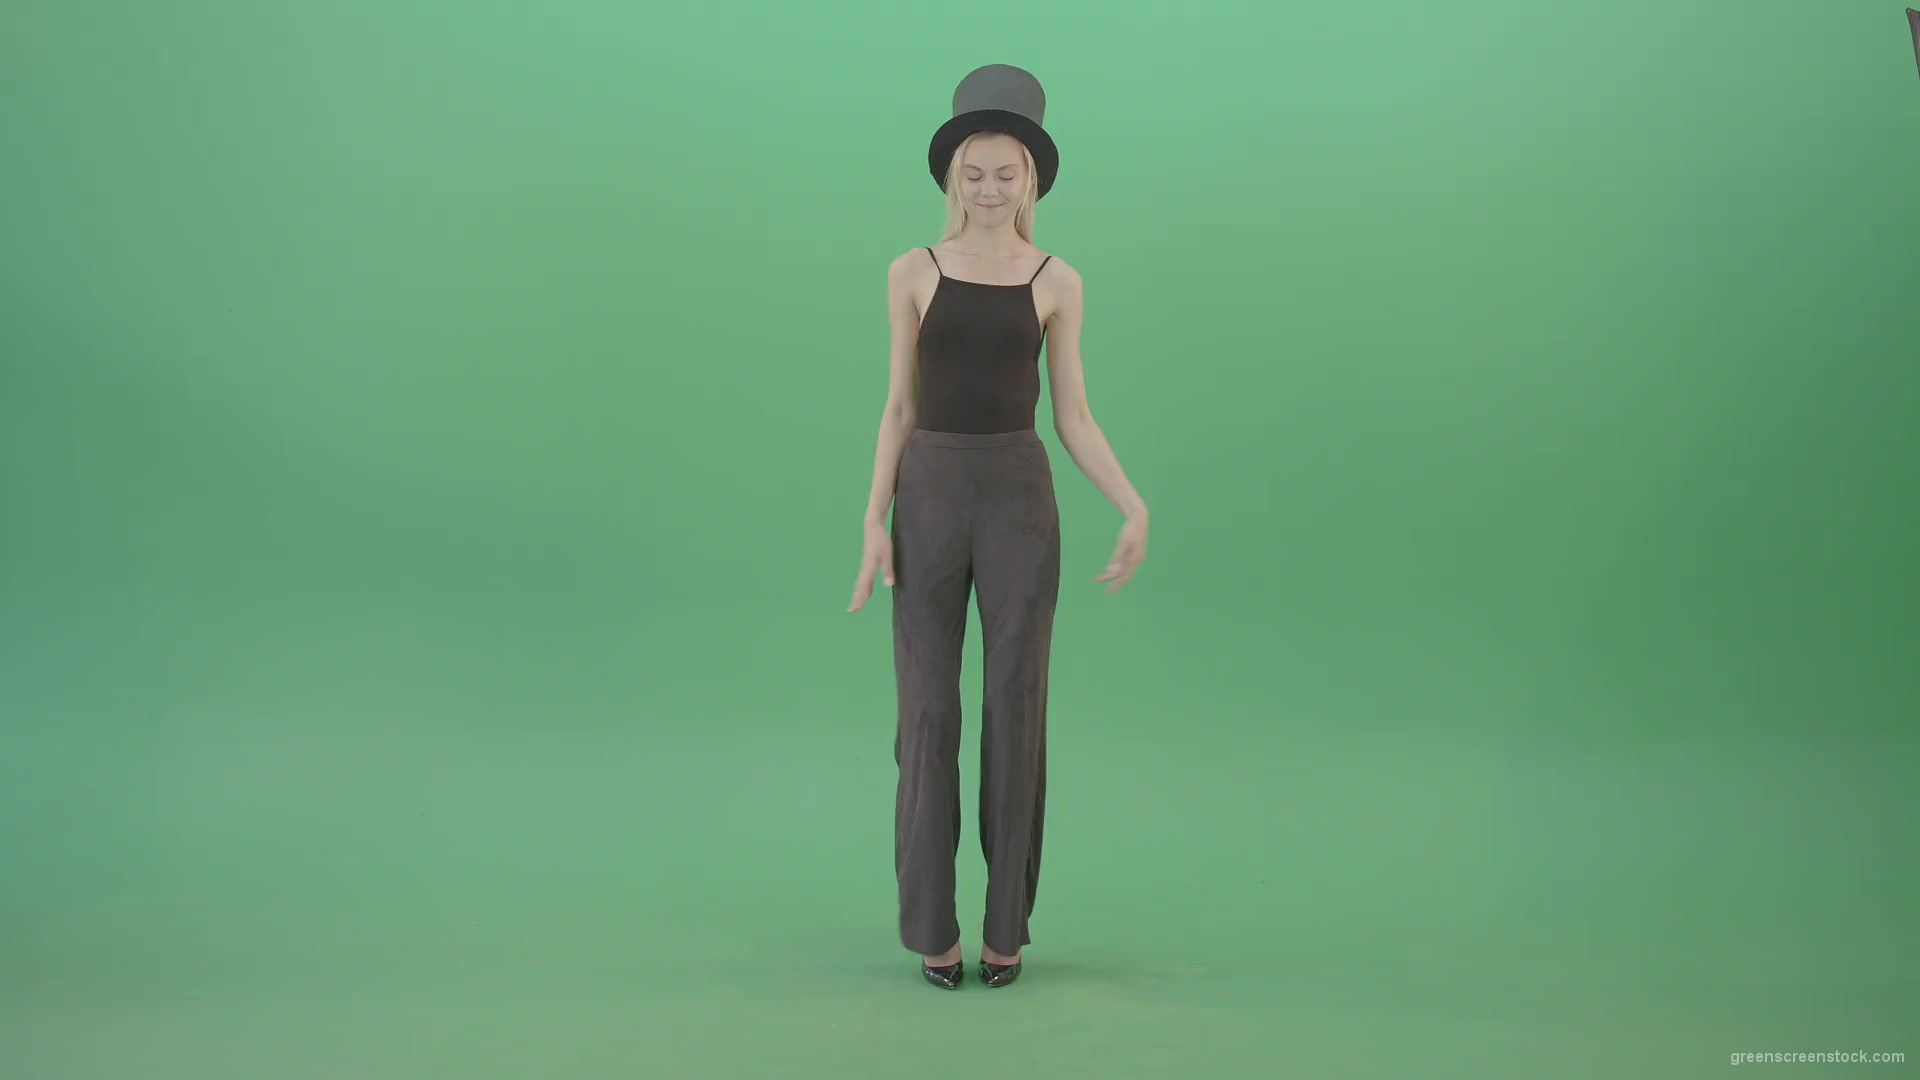 Girl-with-black-busines-cylinder-hat-dancing-isolated-on-green-background-4K-Video-Footage-1920_001 Green Screen Stock